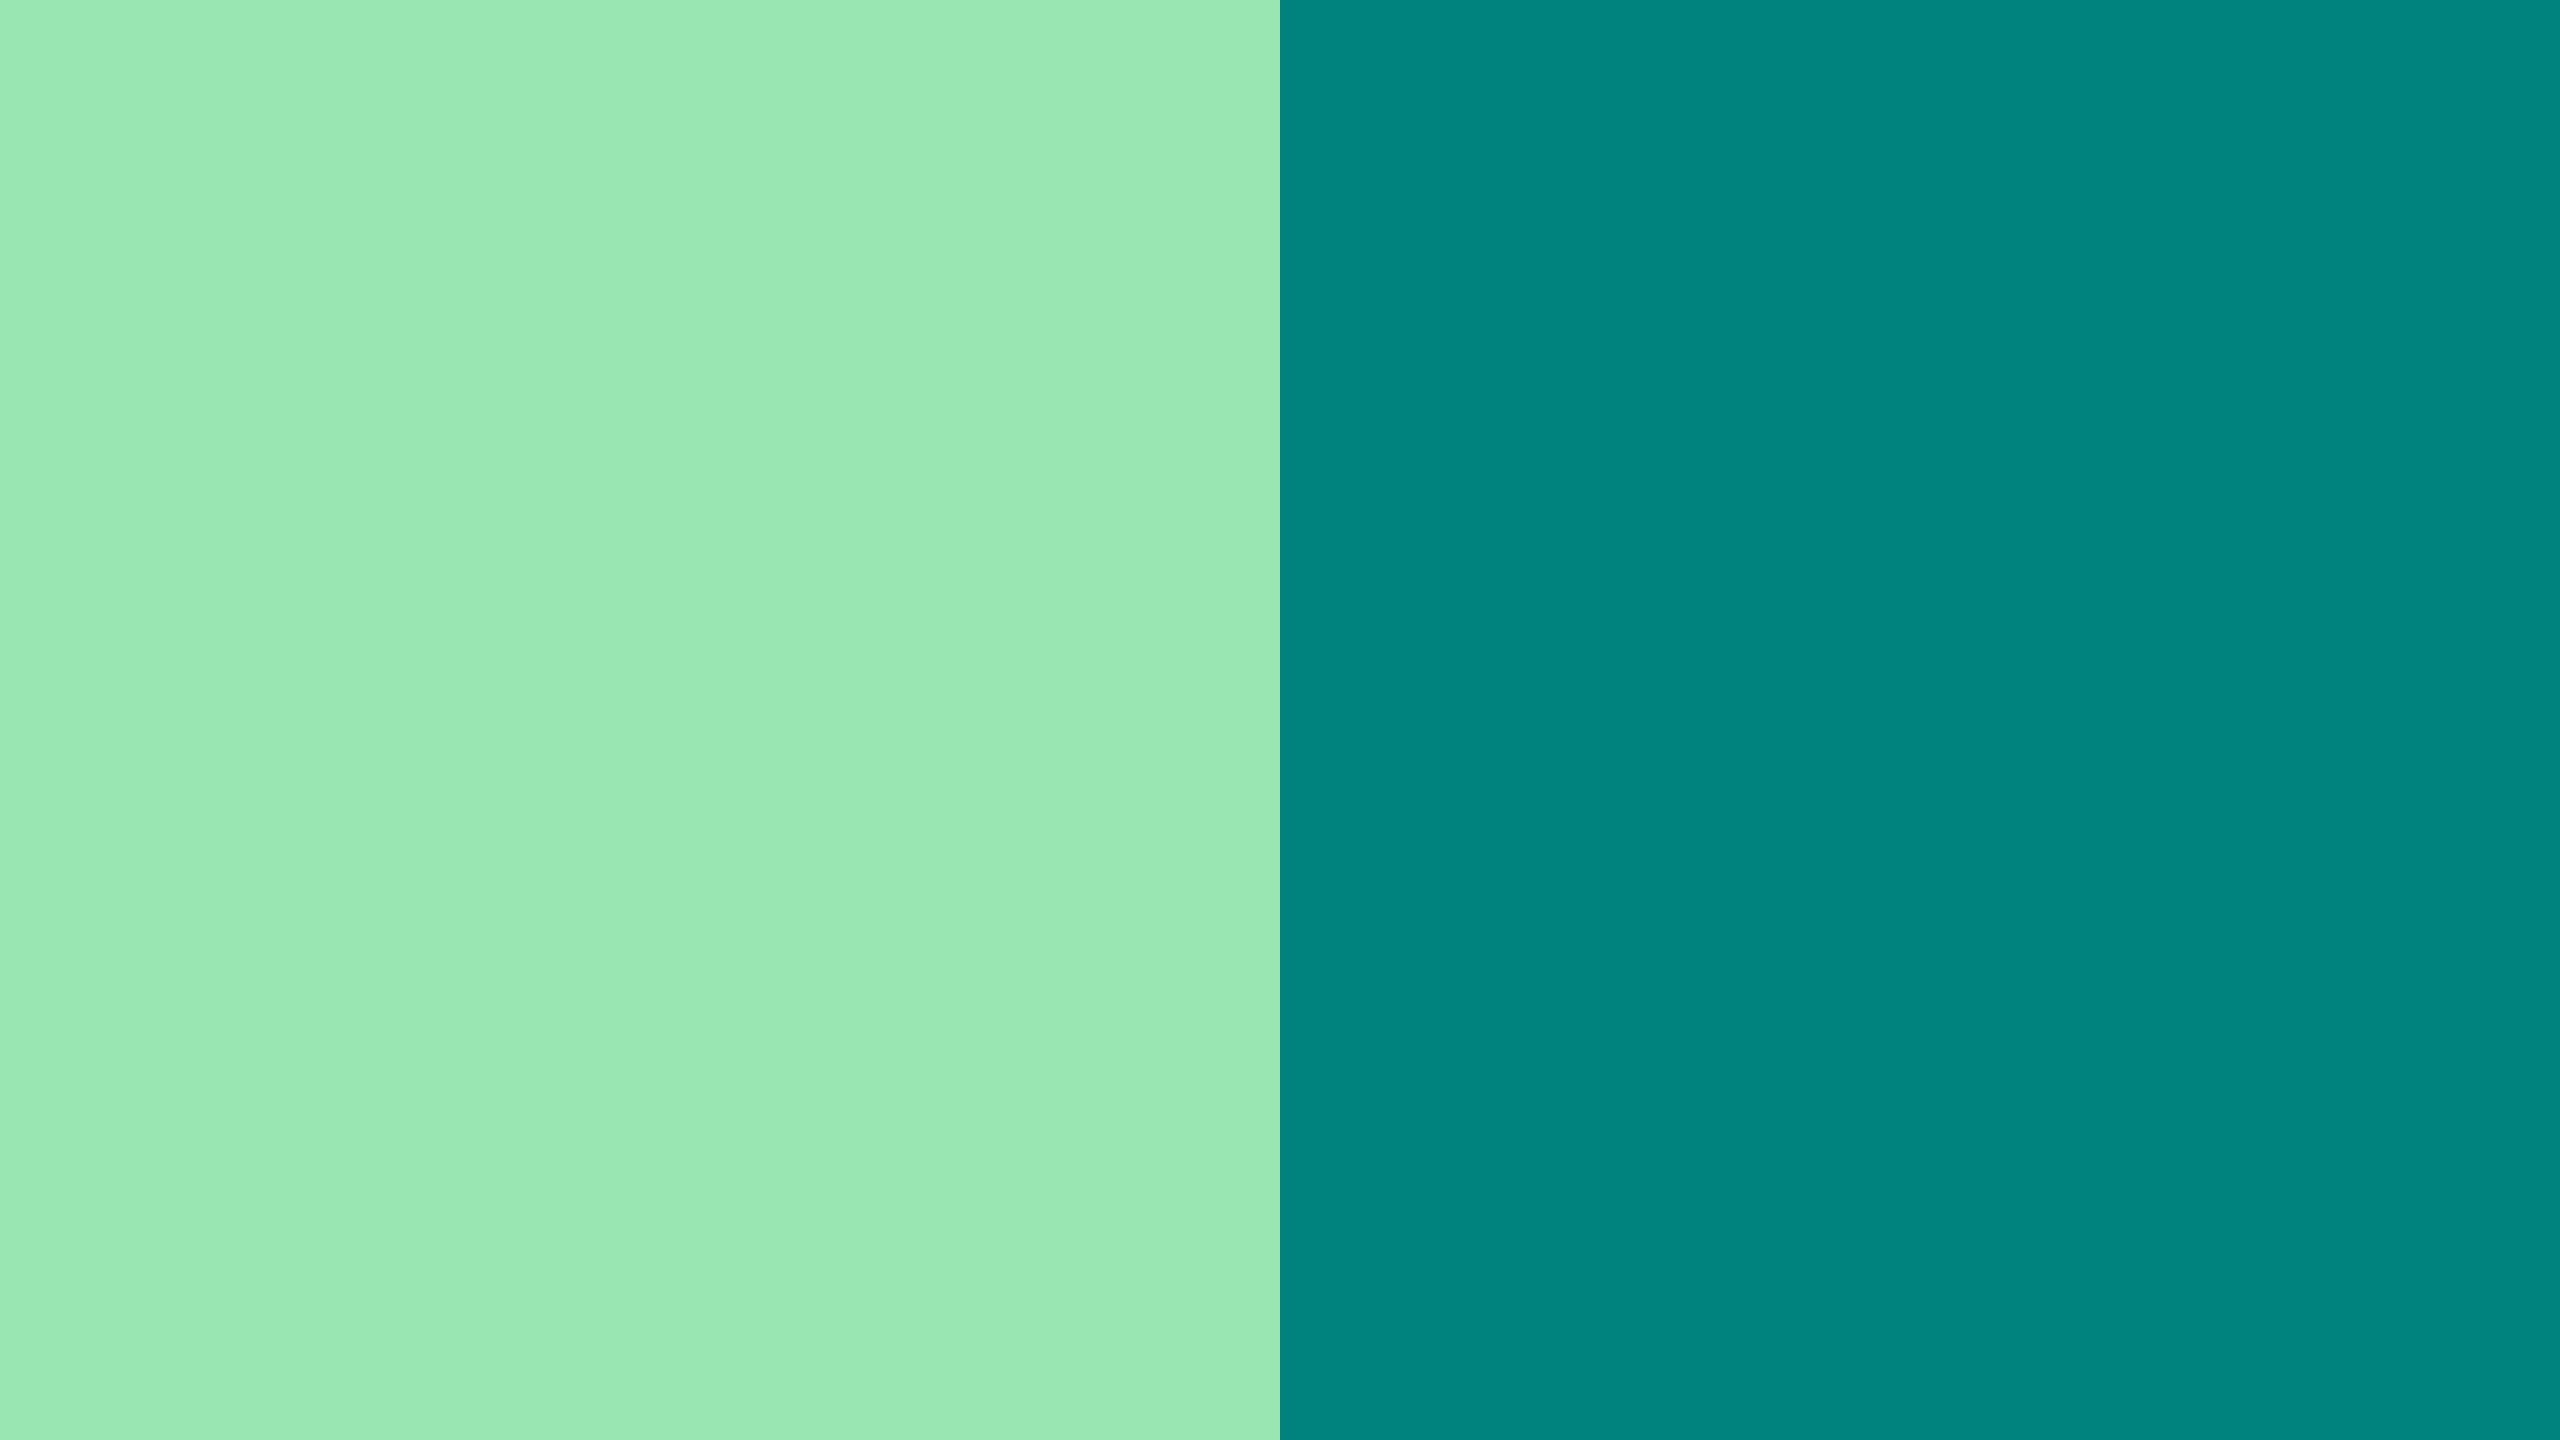 Resolution Teal Deer And Green Solid Two Color